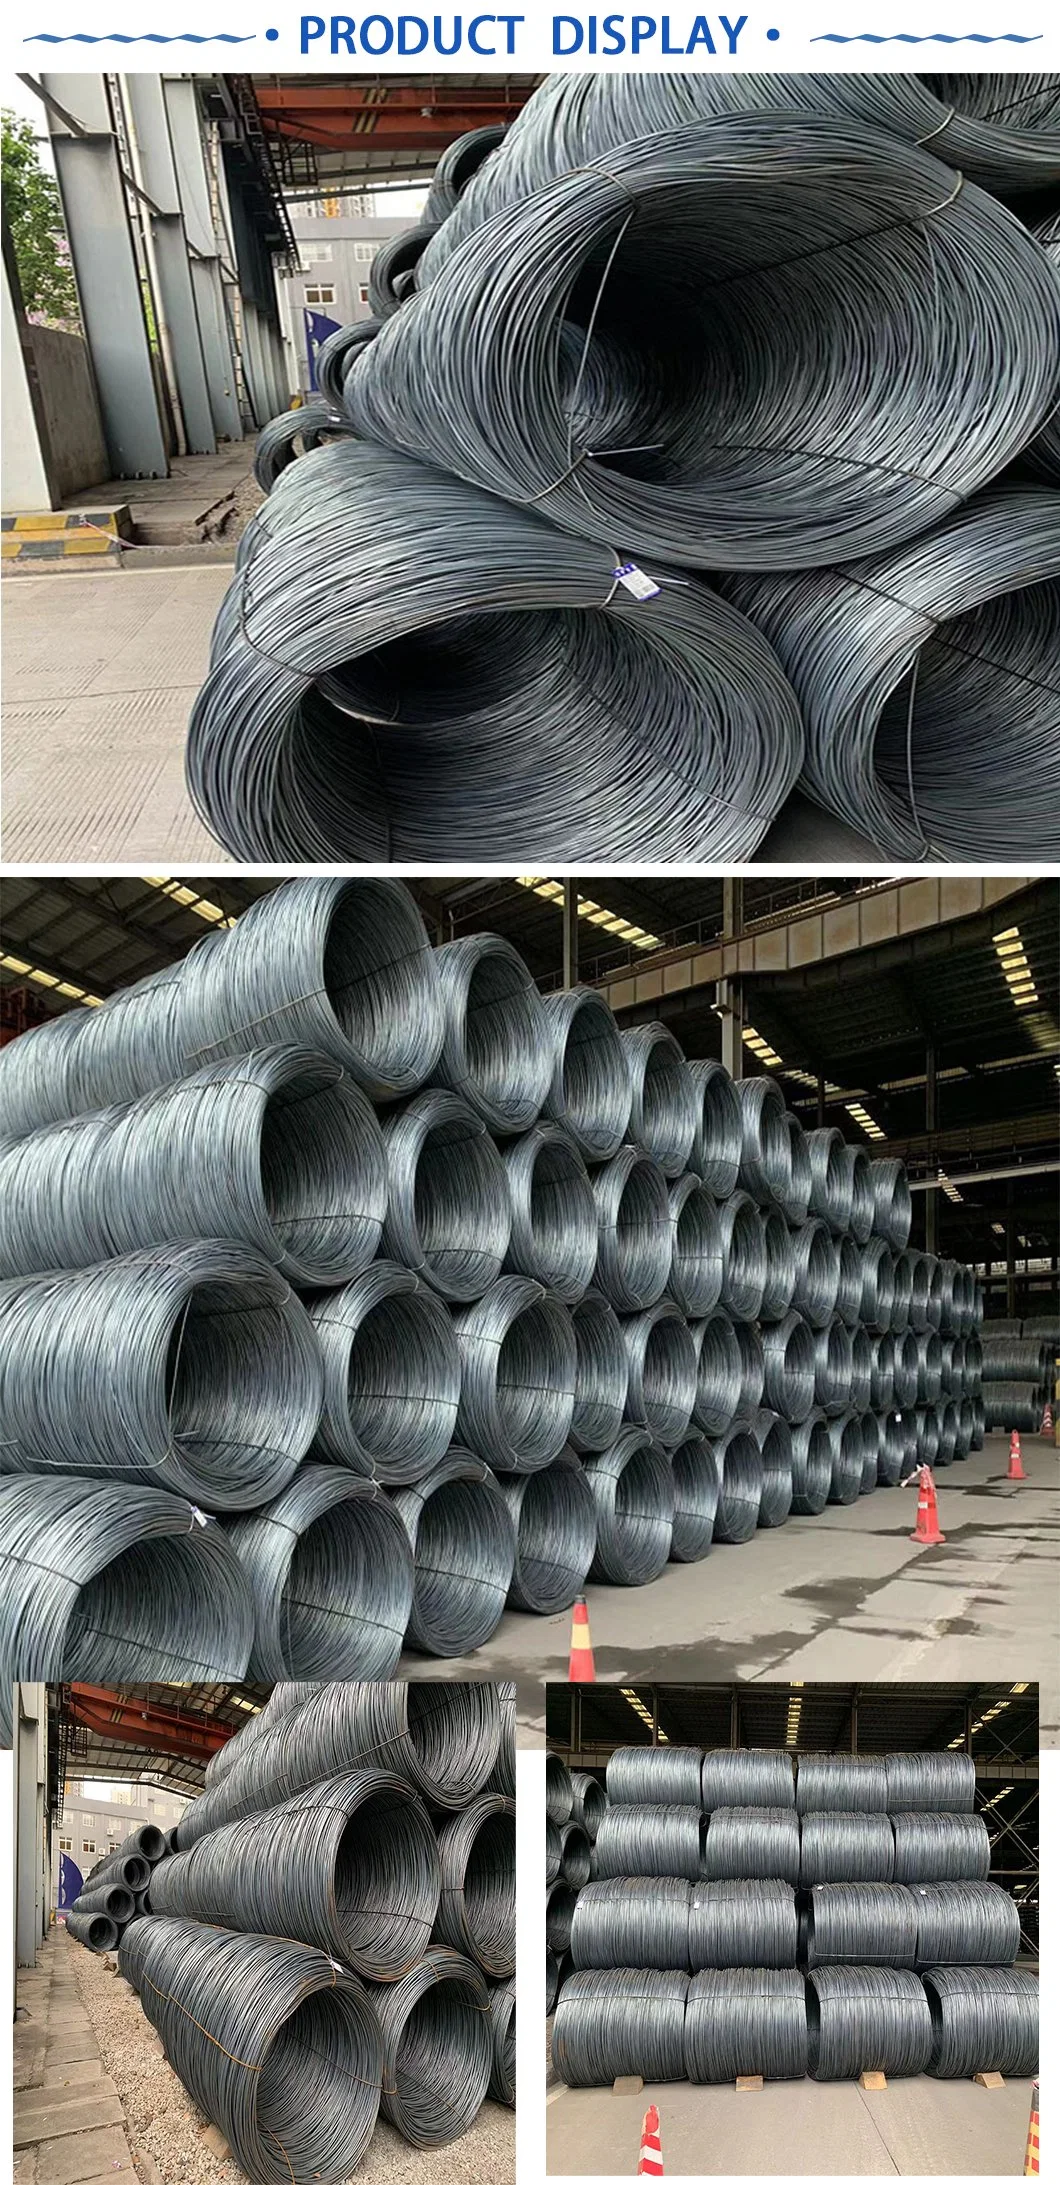 Zinc Coated Hot Dipped Galvanised Rod 0.5mm High Tensile Galvanized Steel